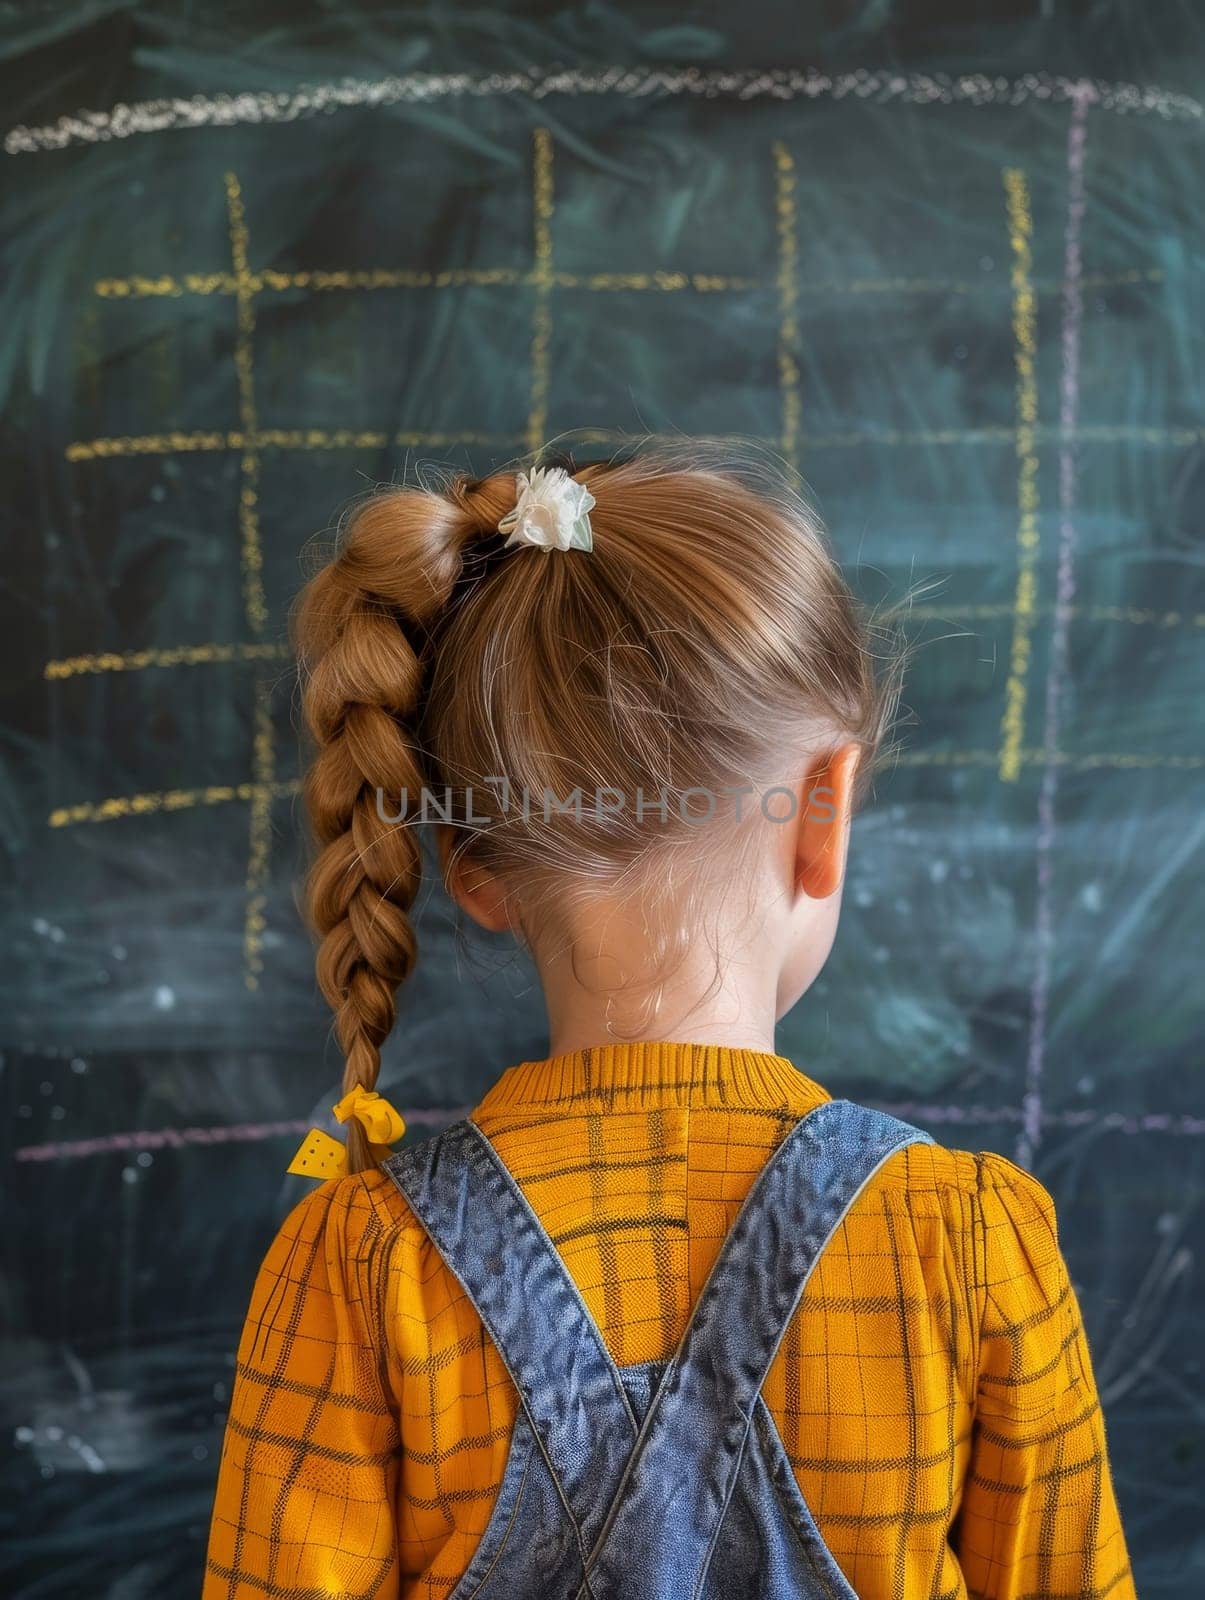 A young girl in a yellow shirt stands before a chalkboard covered in math equations. Her attention is captured by the complex problems ahead.. by sfinks